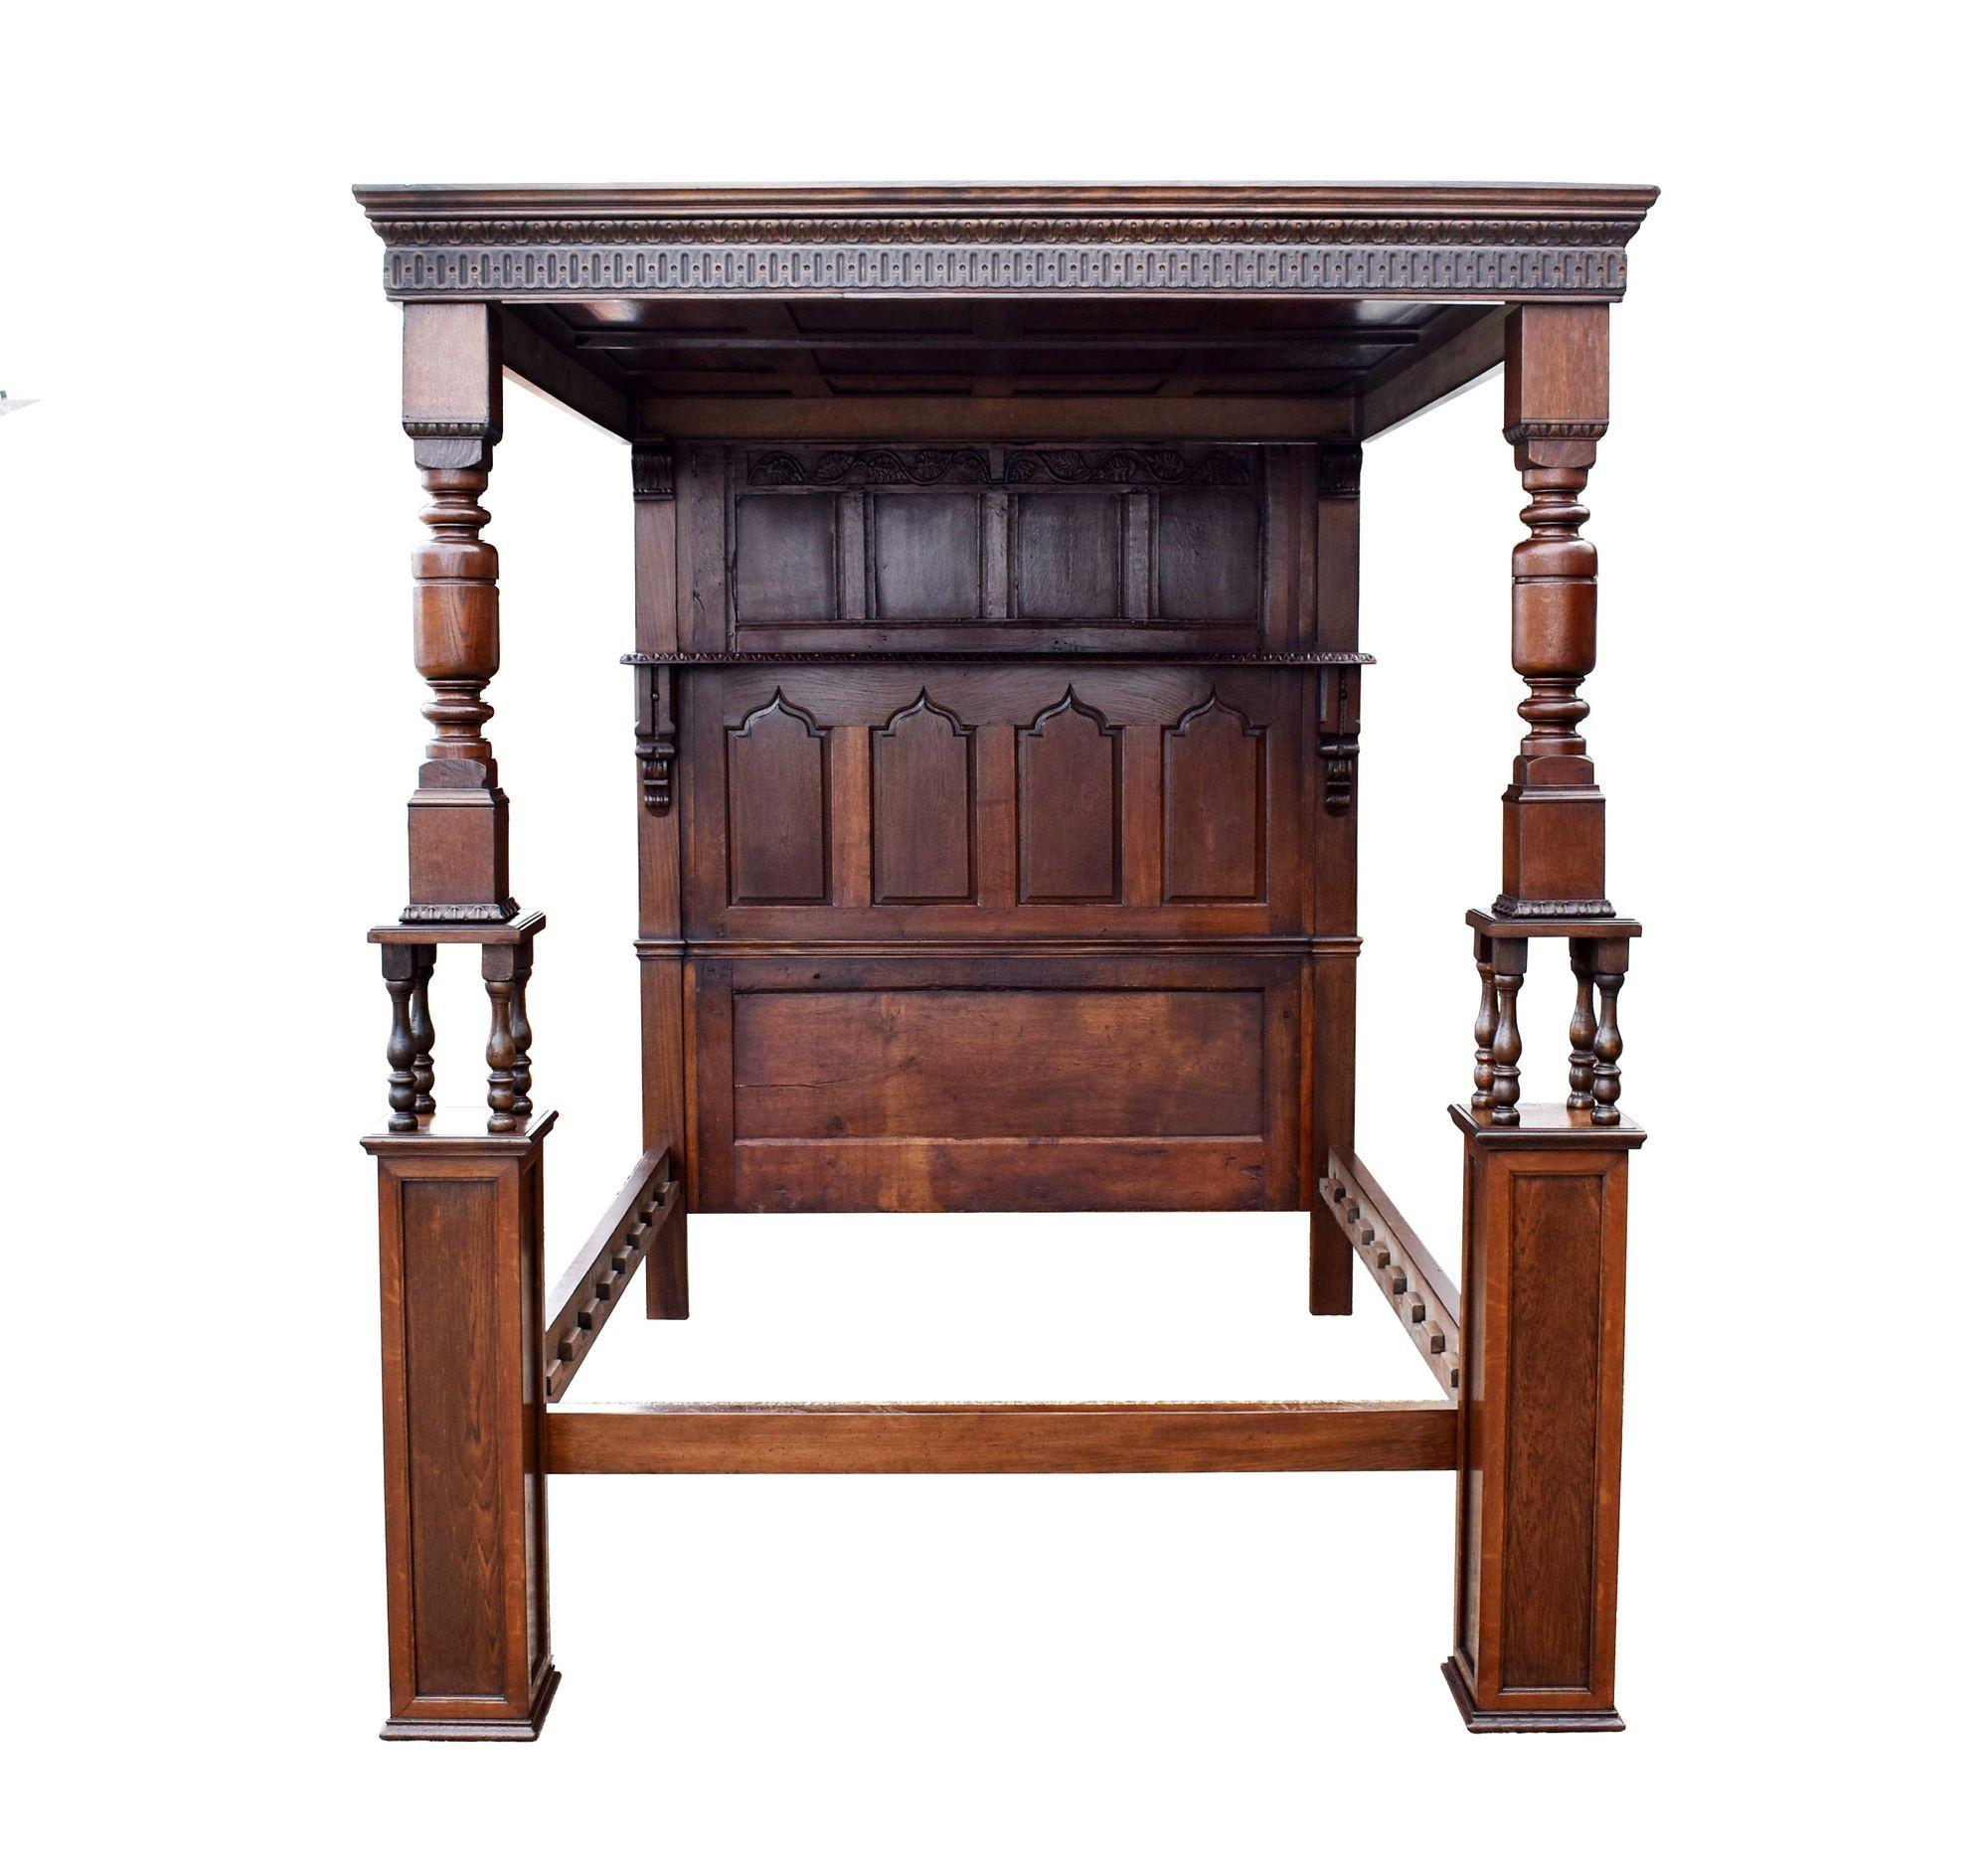 For sale is a part 18th century carved oak four poster bed, having a paneled canopy surrounded by ornate carvings, above the paneled headboard. The canopy is supported by two turned oak columns. The bed is in very good condition. 
 
Width: 177cm